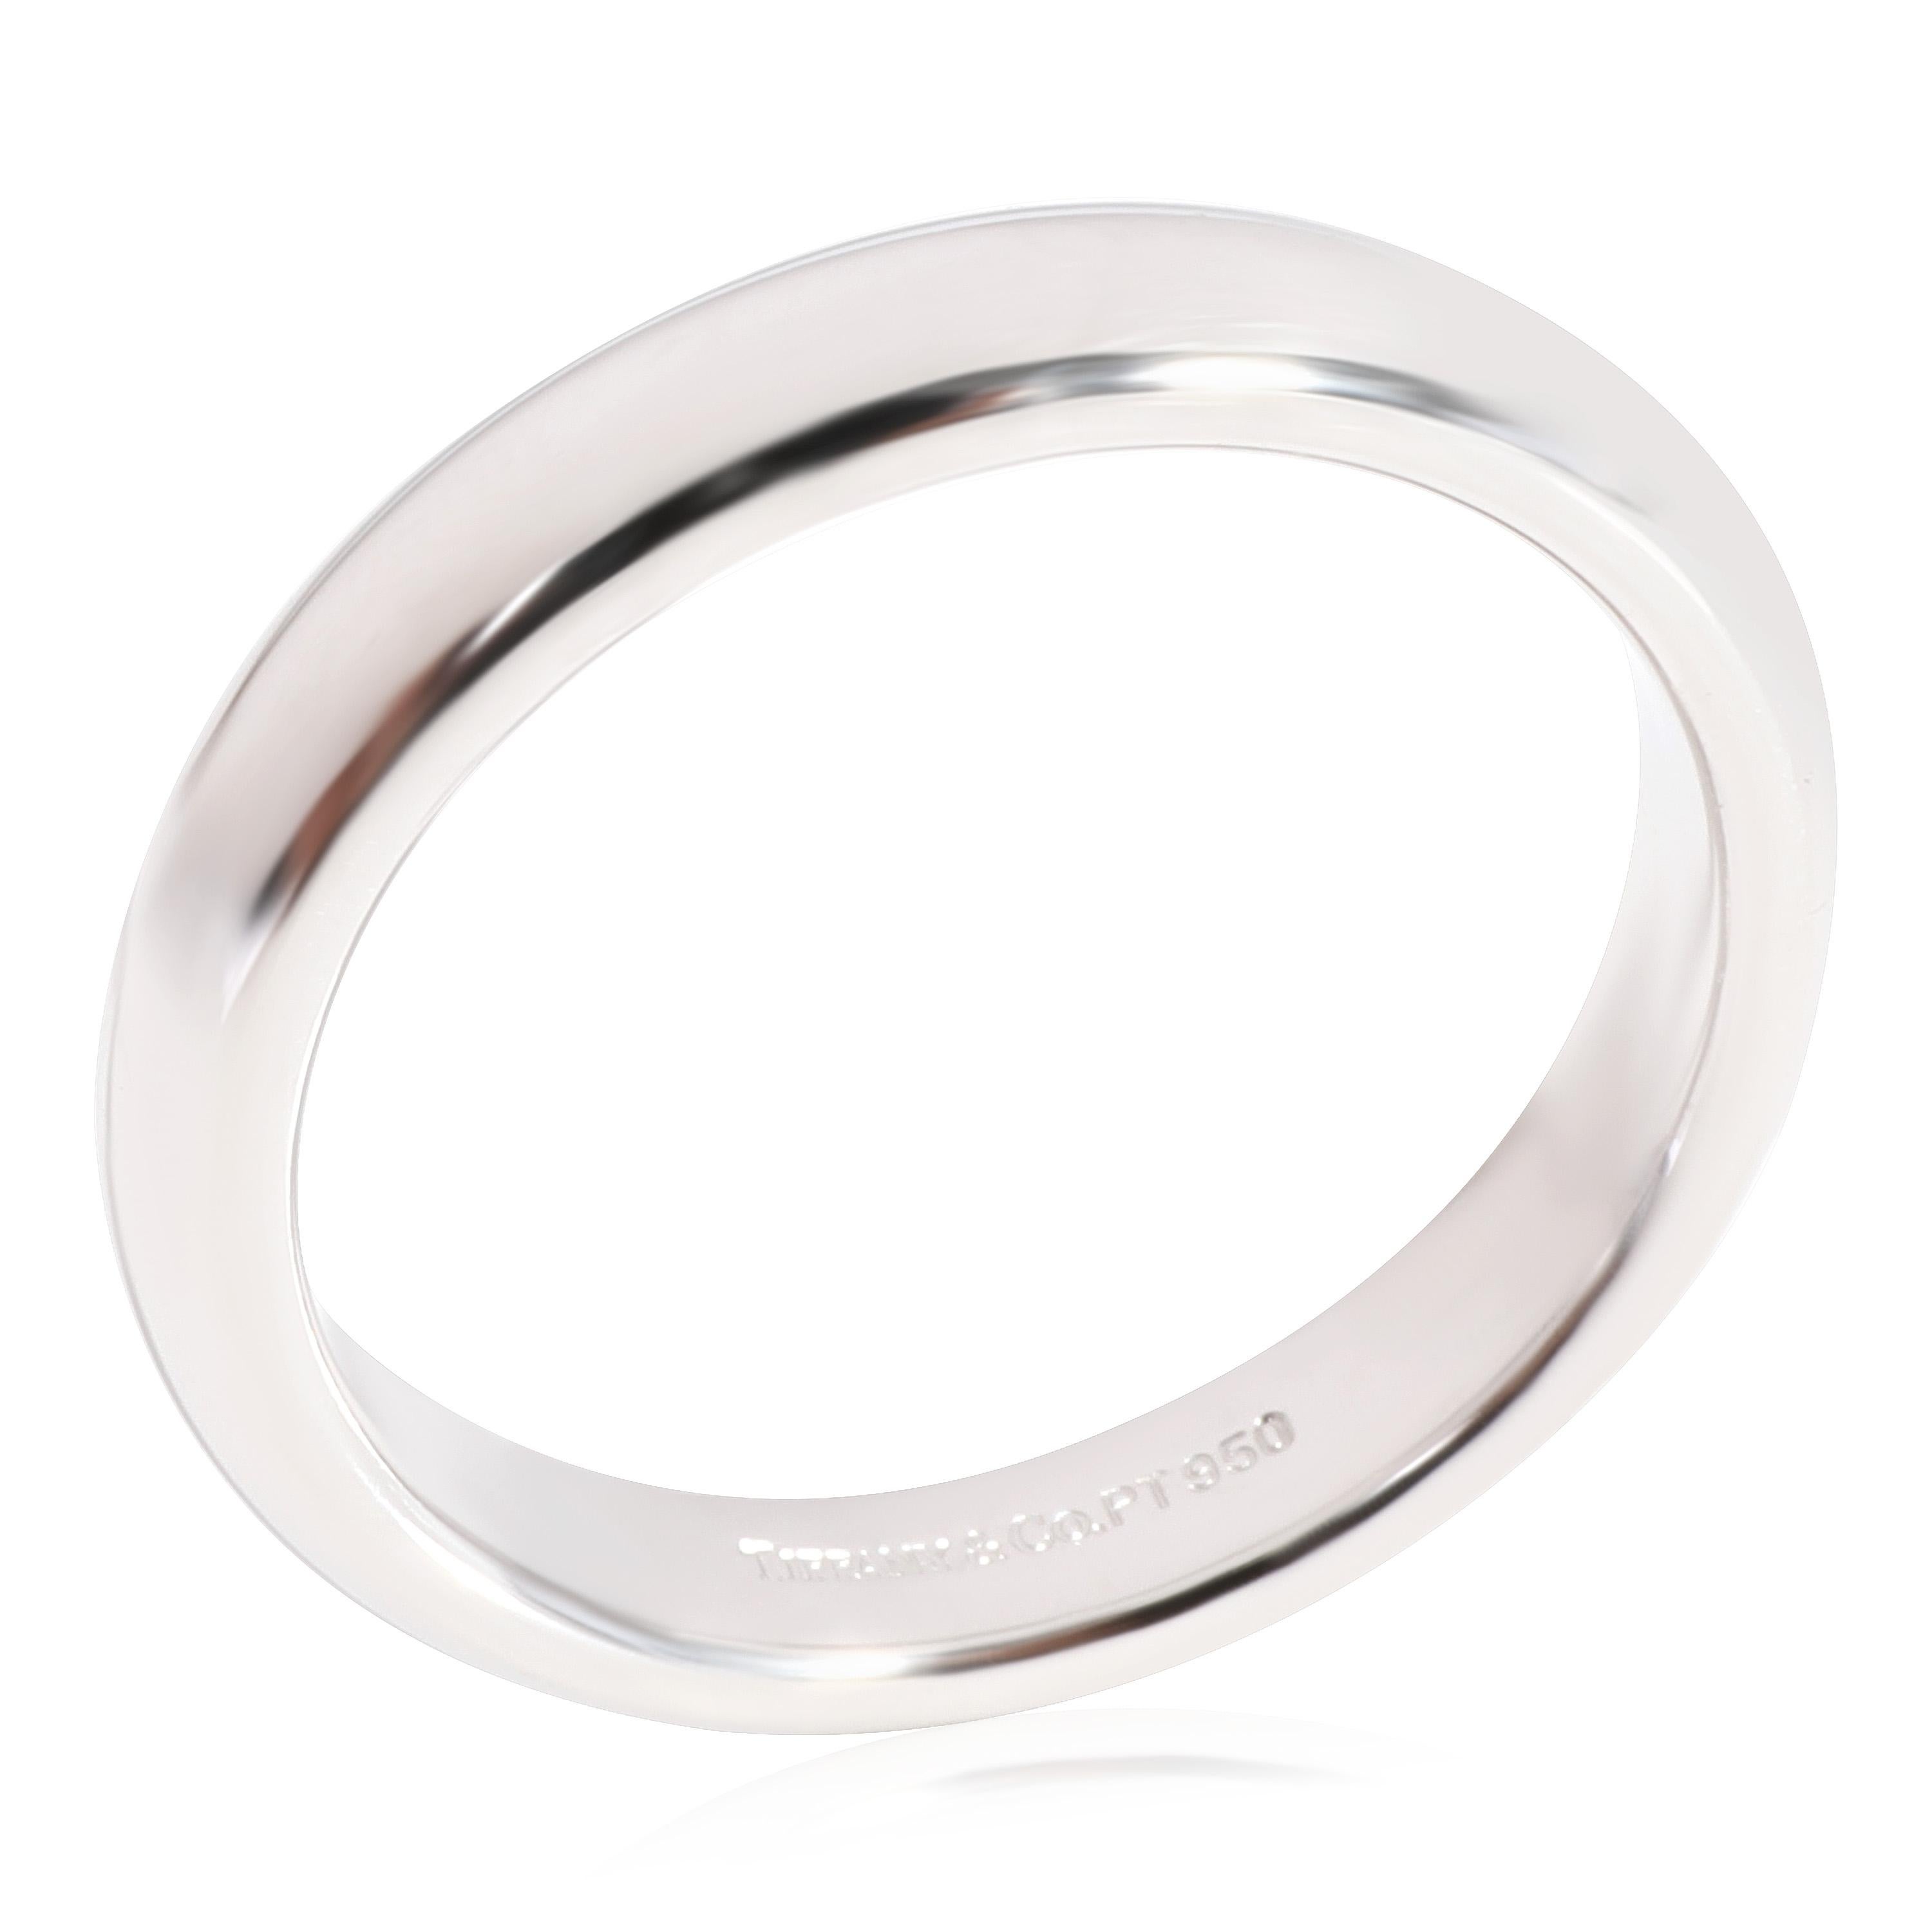 Tiffany & Co. Classic Wedding Band in Platinum

PRIMARY DETAILS
SKU: 118387
Listing Title: Tiffany & Co. Classic Wedding Band in Platinum
Condition Description: Retails for 1800 USD. In excellent condition and recently polished. Ring size is